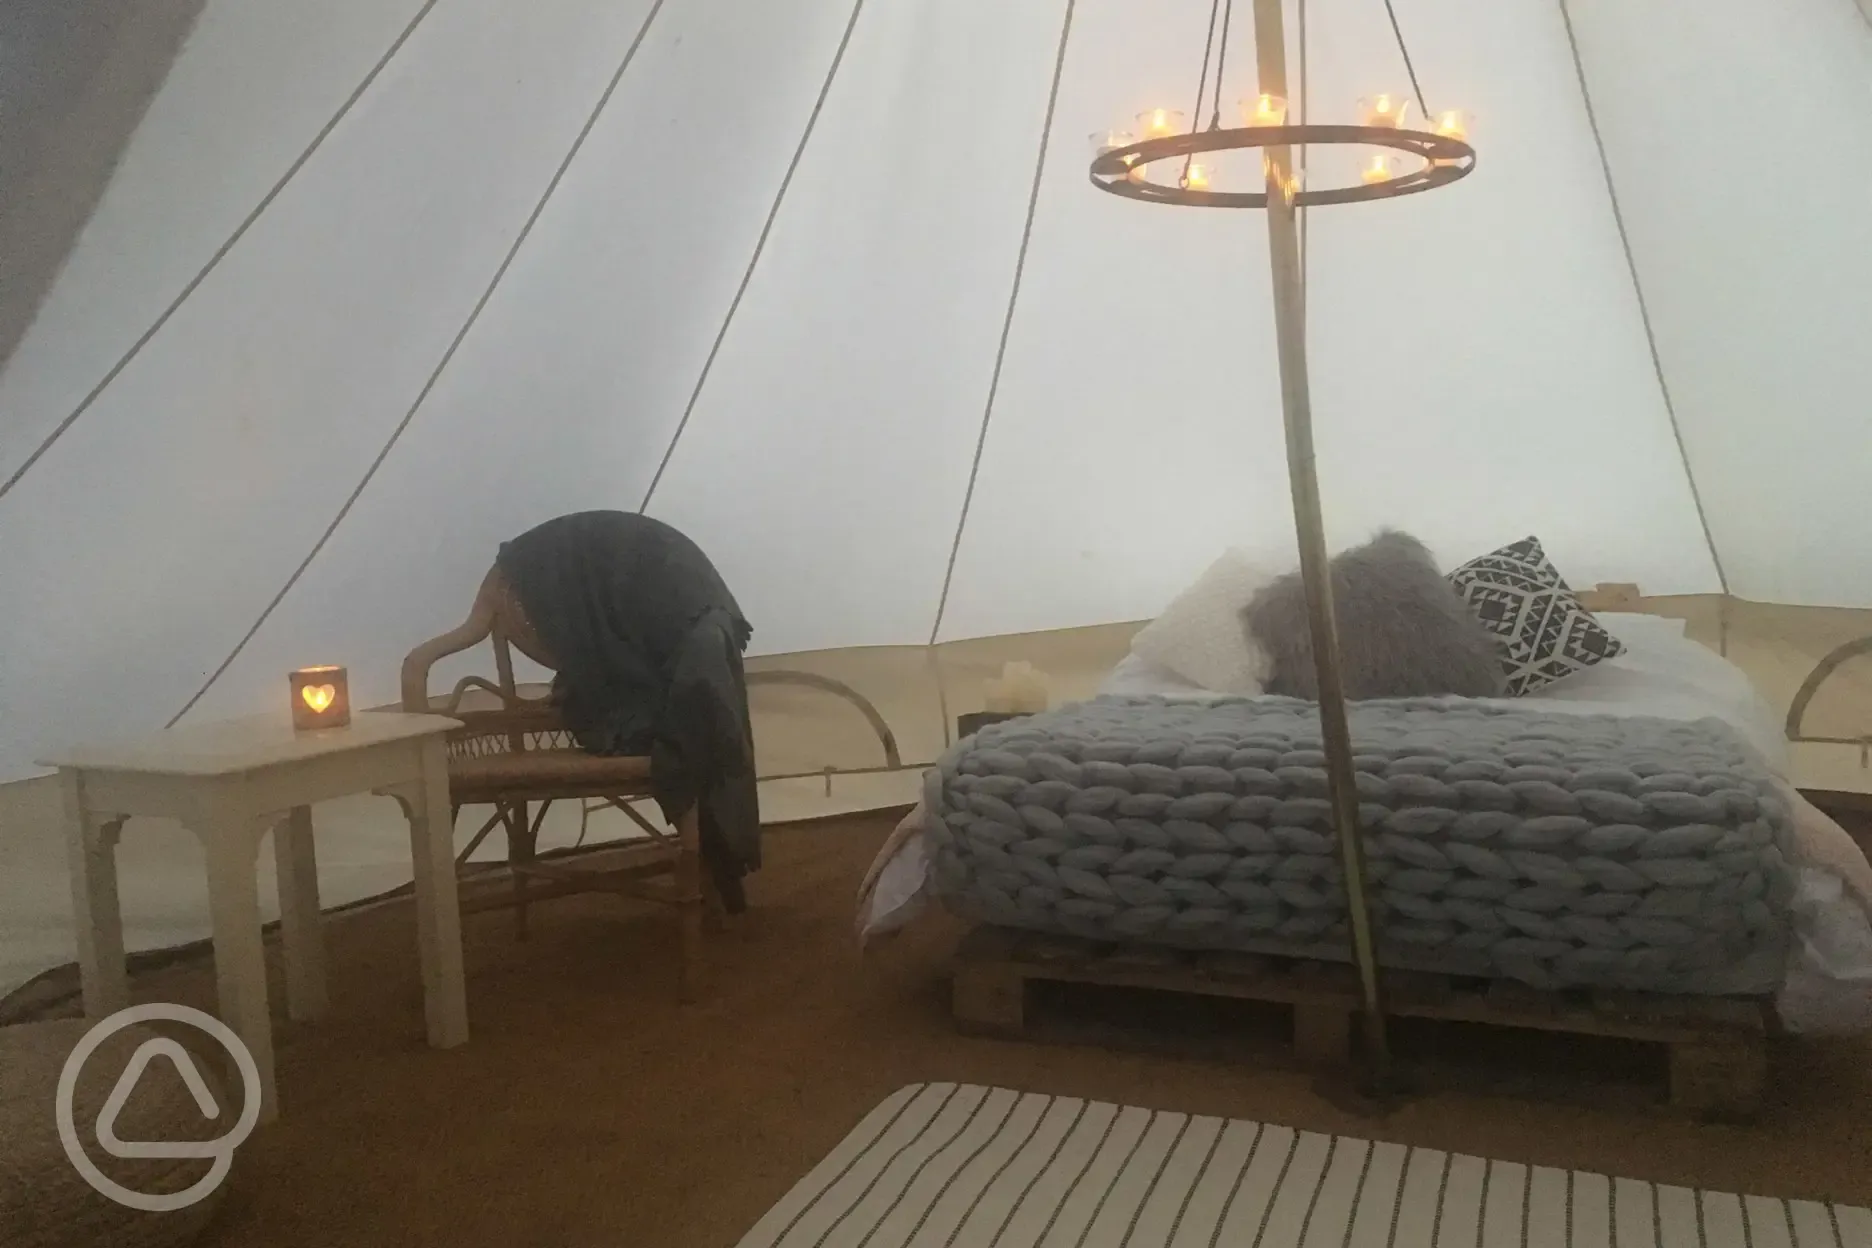 Our Scandi themed bell tent 